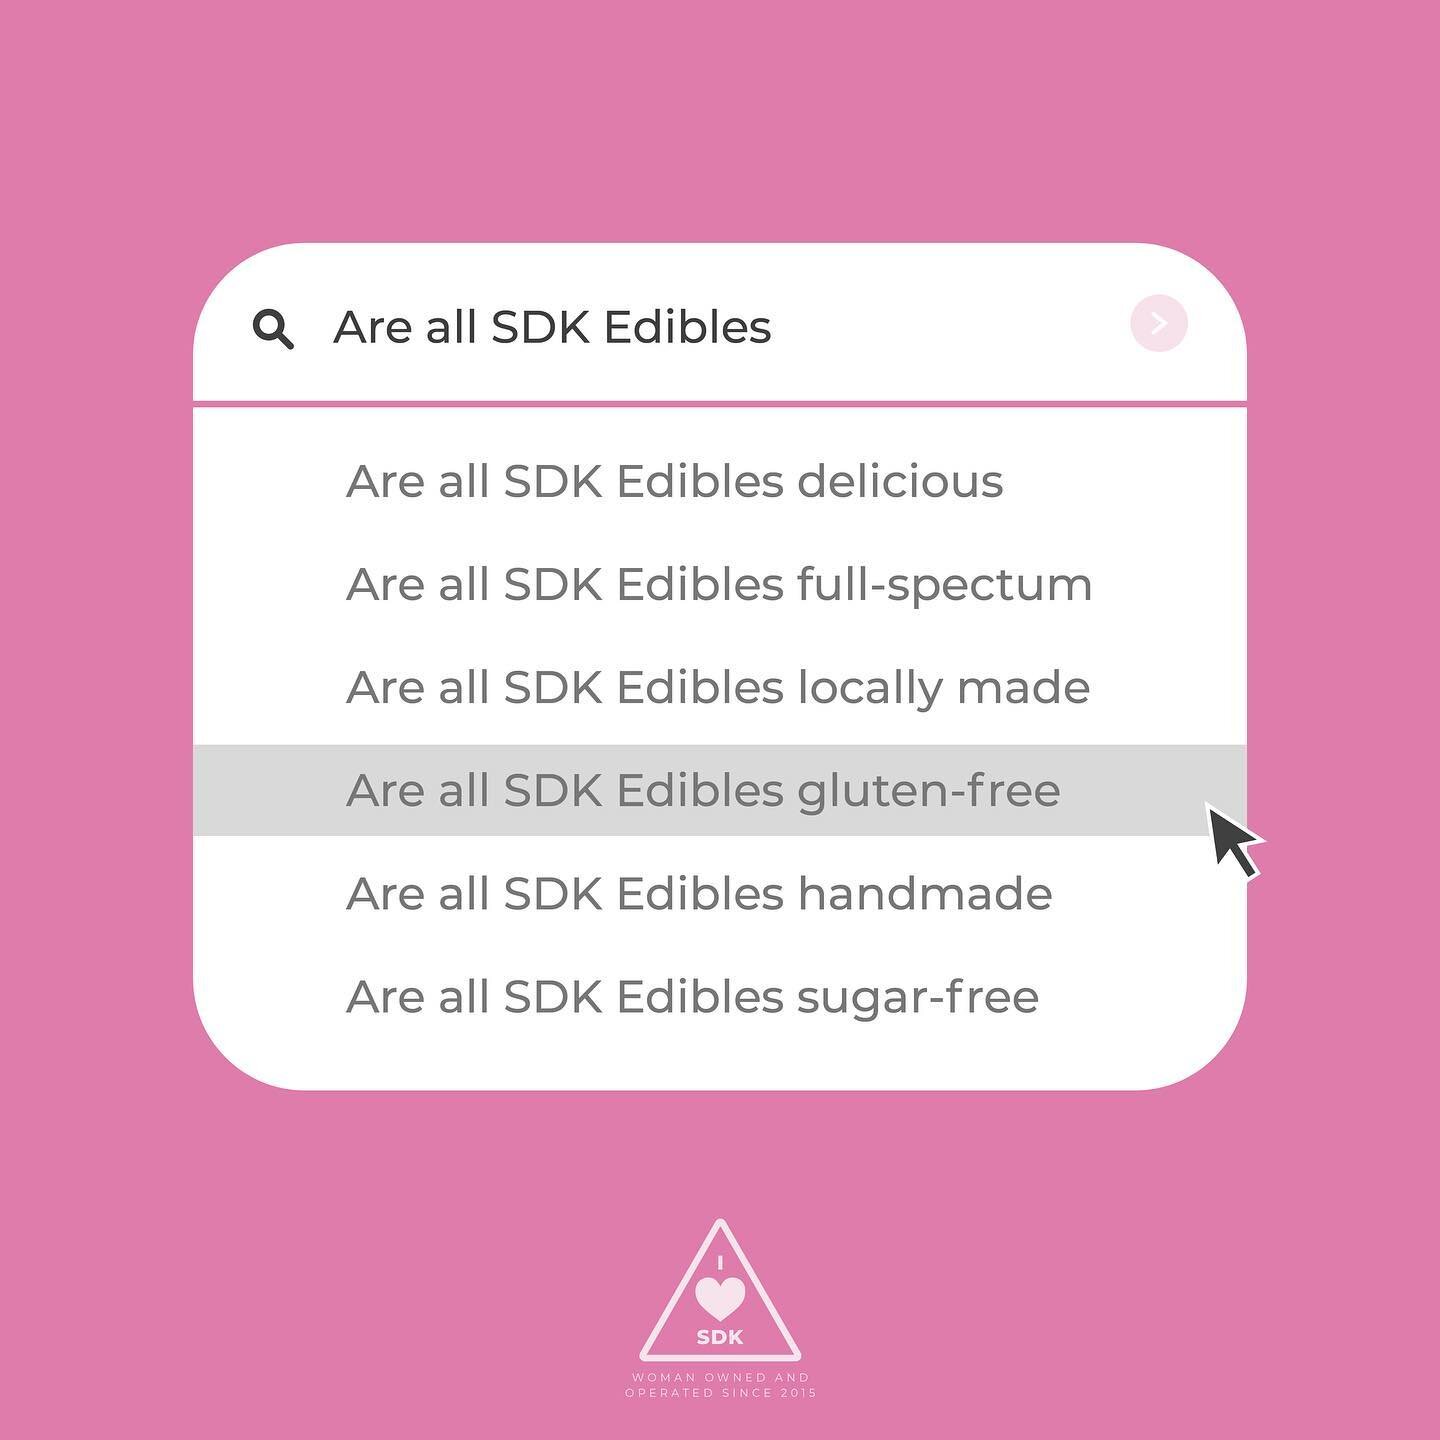 Questions about SDK Snacks? Our website has all the answers! From maps to local dispensaries to ingredients and allergen lists, all the SDK info is just a click away! 

Not for sale. Do not drive or operate machinery while under the influence of mari